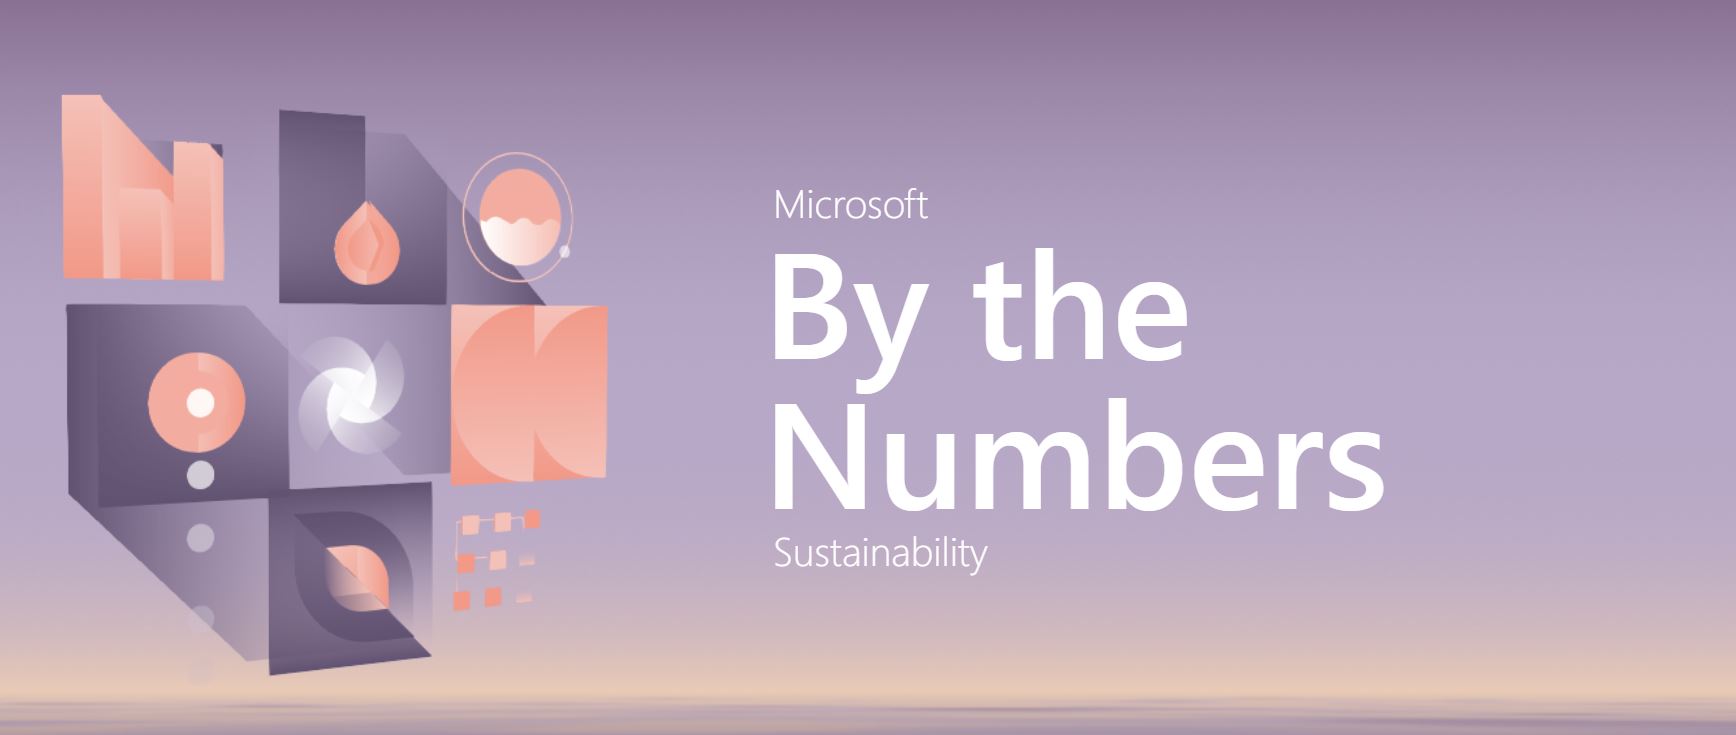 Sustainability by the Numbers